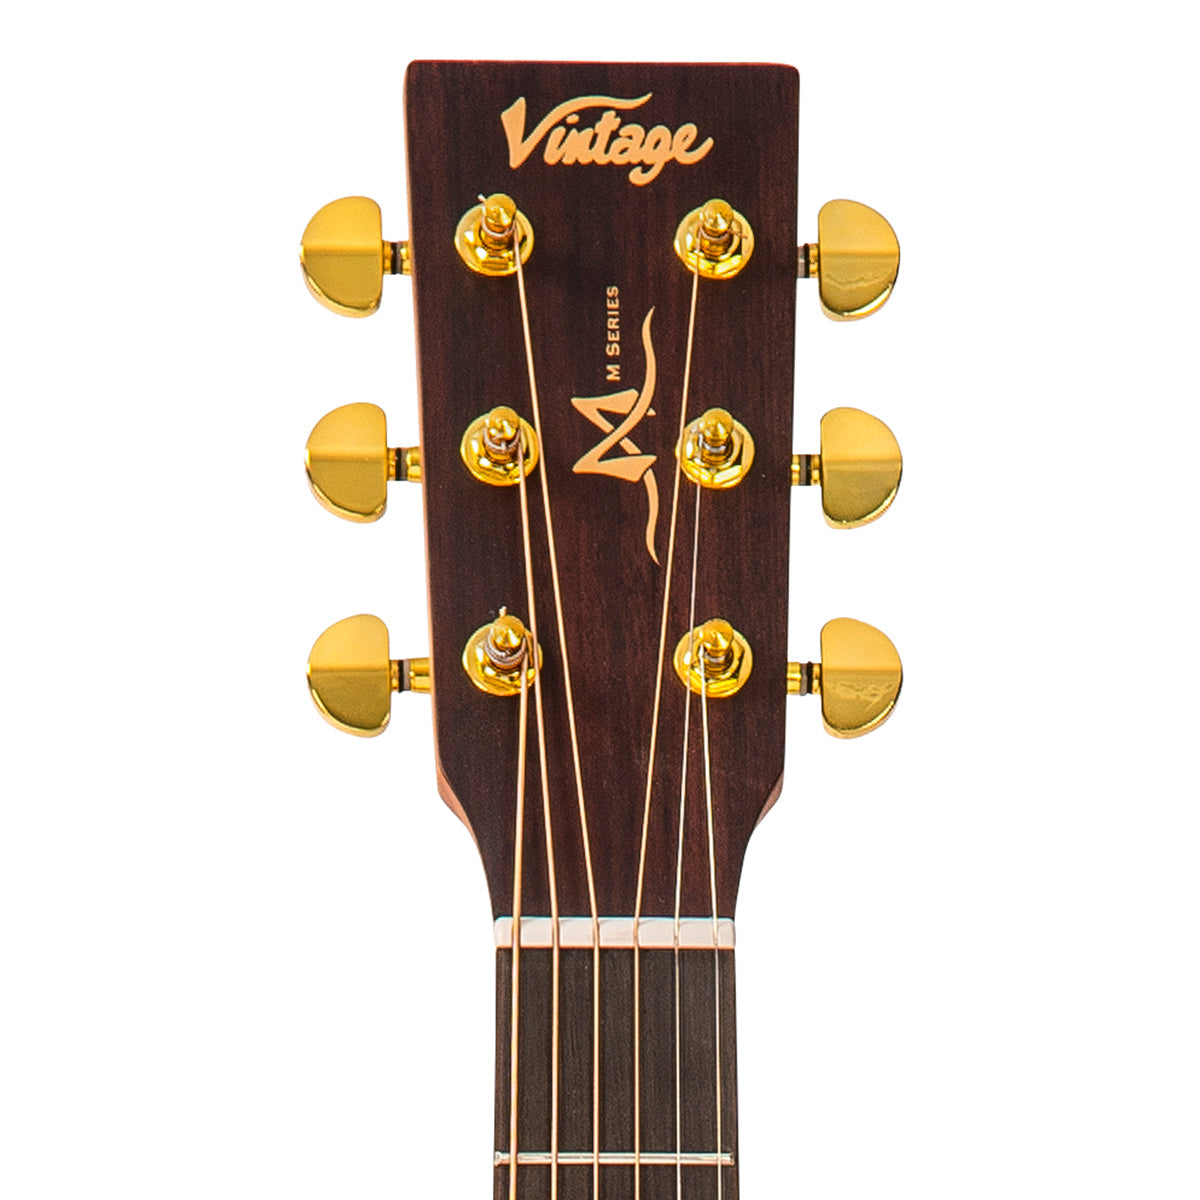 Vintage Mahogany Series 'Parlour' Electro-Acoustic Guitar ~ Satin Mahogany, Electric Acoustic Guitars for sale at Richards Guitars.